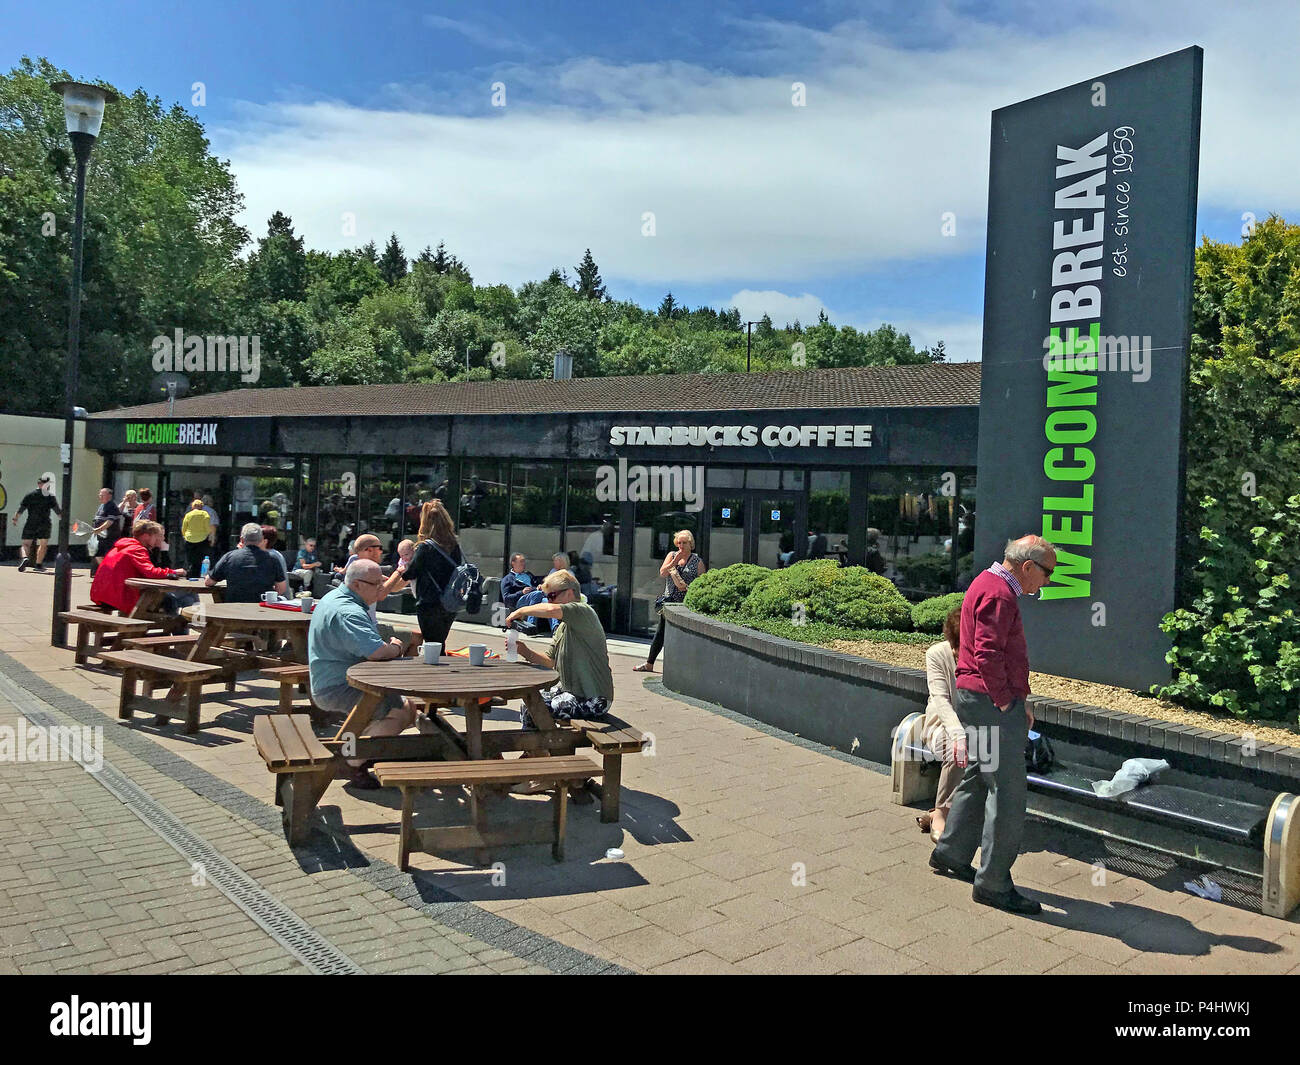 Welcome Break, Michaelwood Services - M5 south, Dursley, southern Gloucestershire,, England, UK ,GL11 6DD Stock Photo